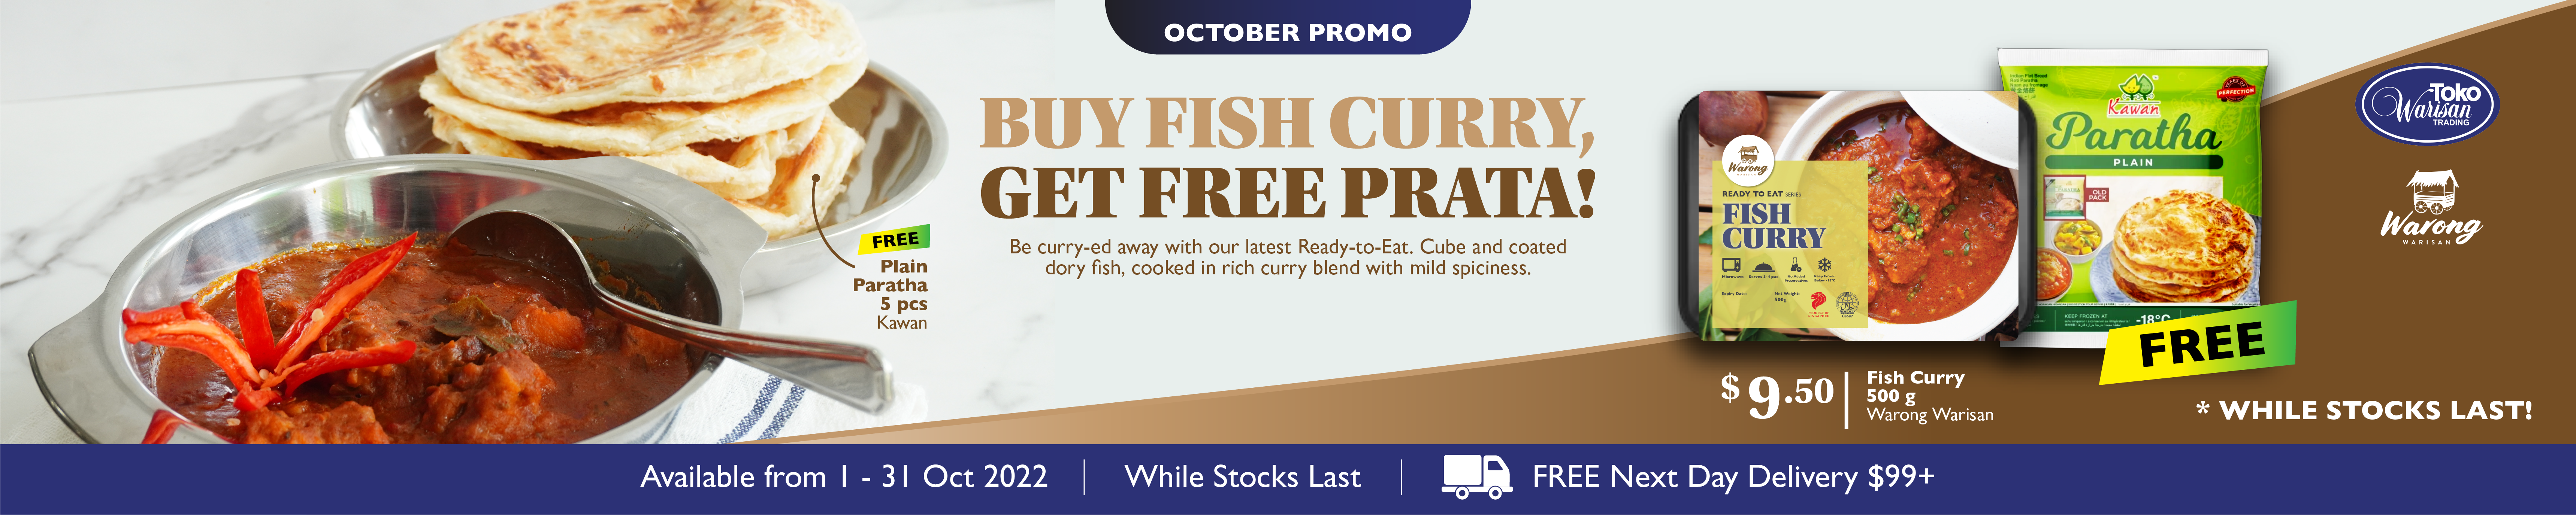 october monthly promotion childrens day special fish curry warong warisan prata